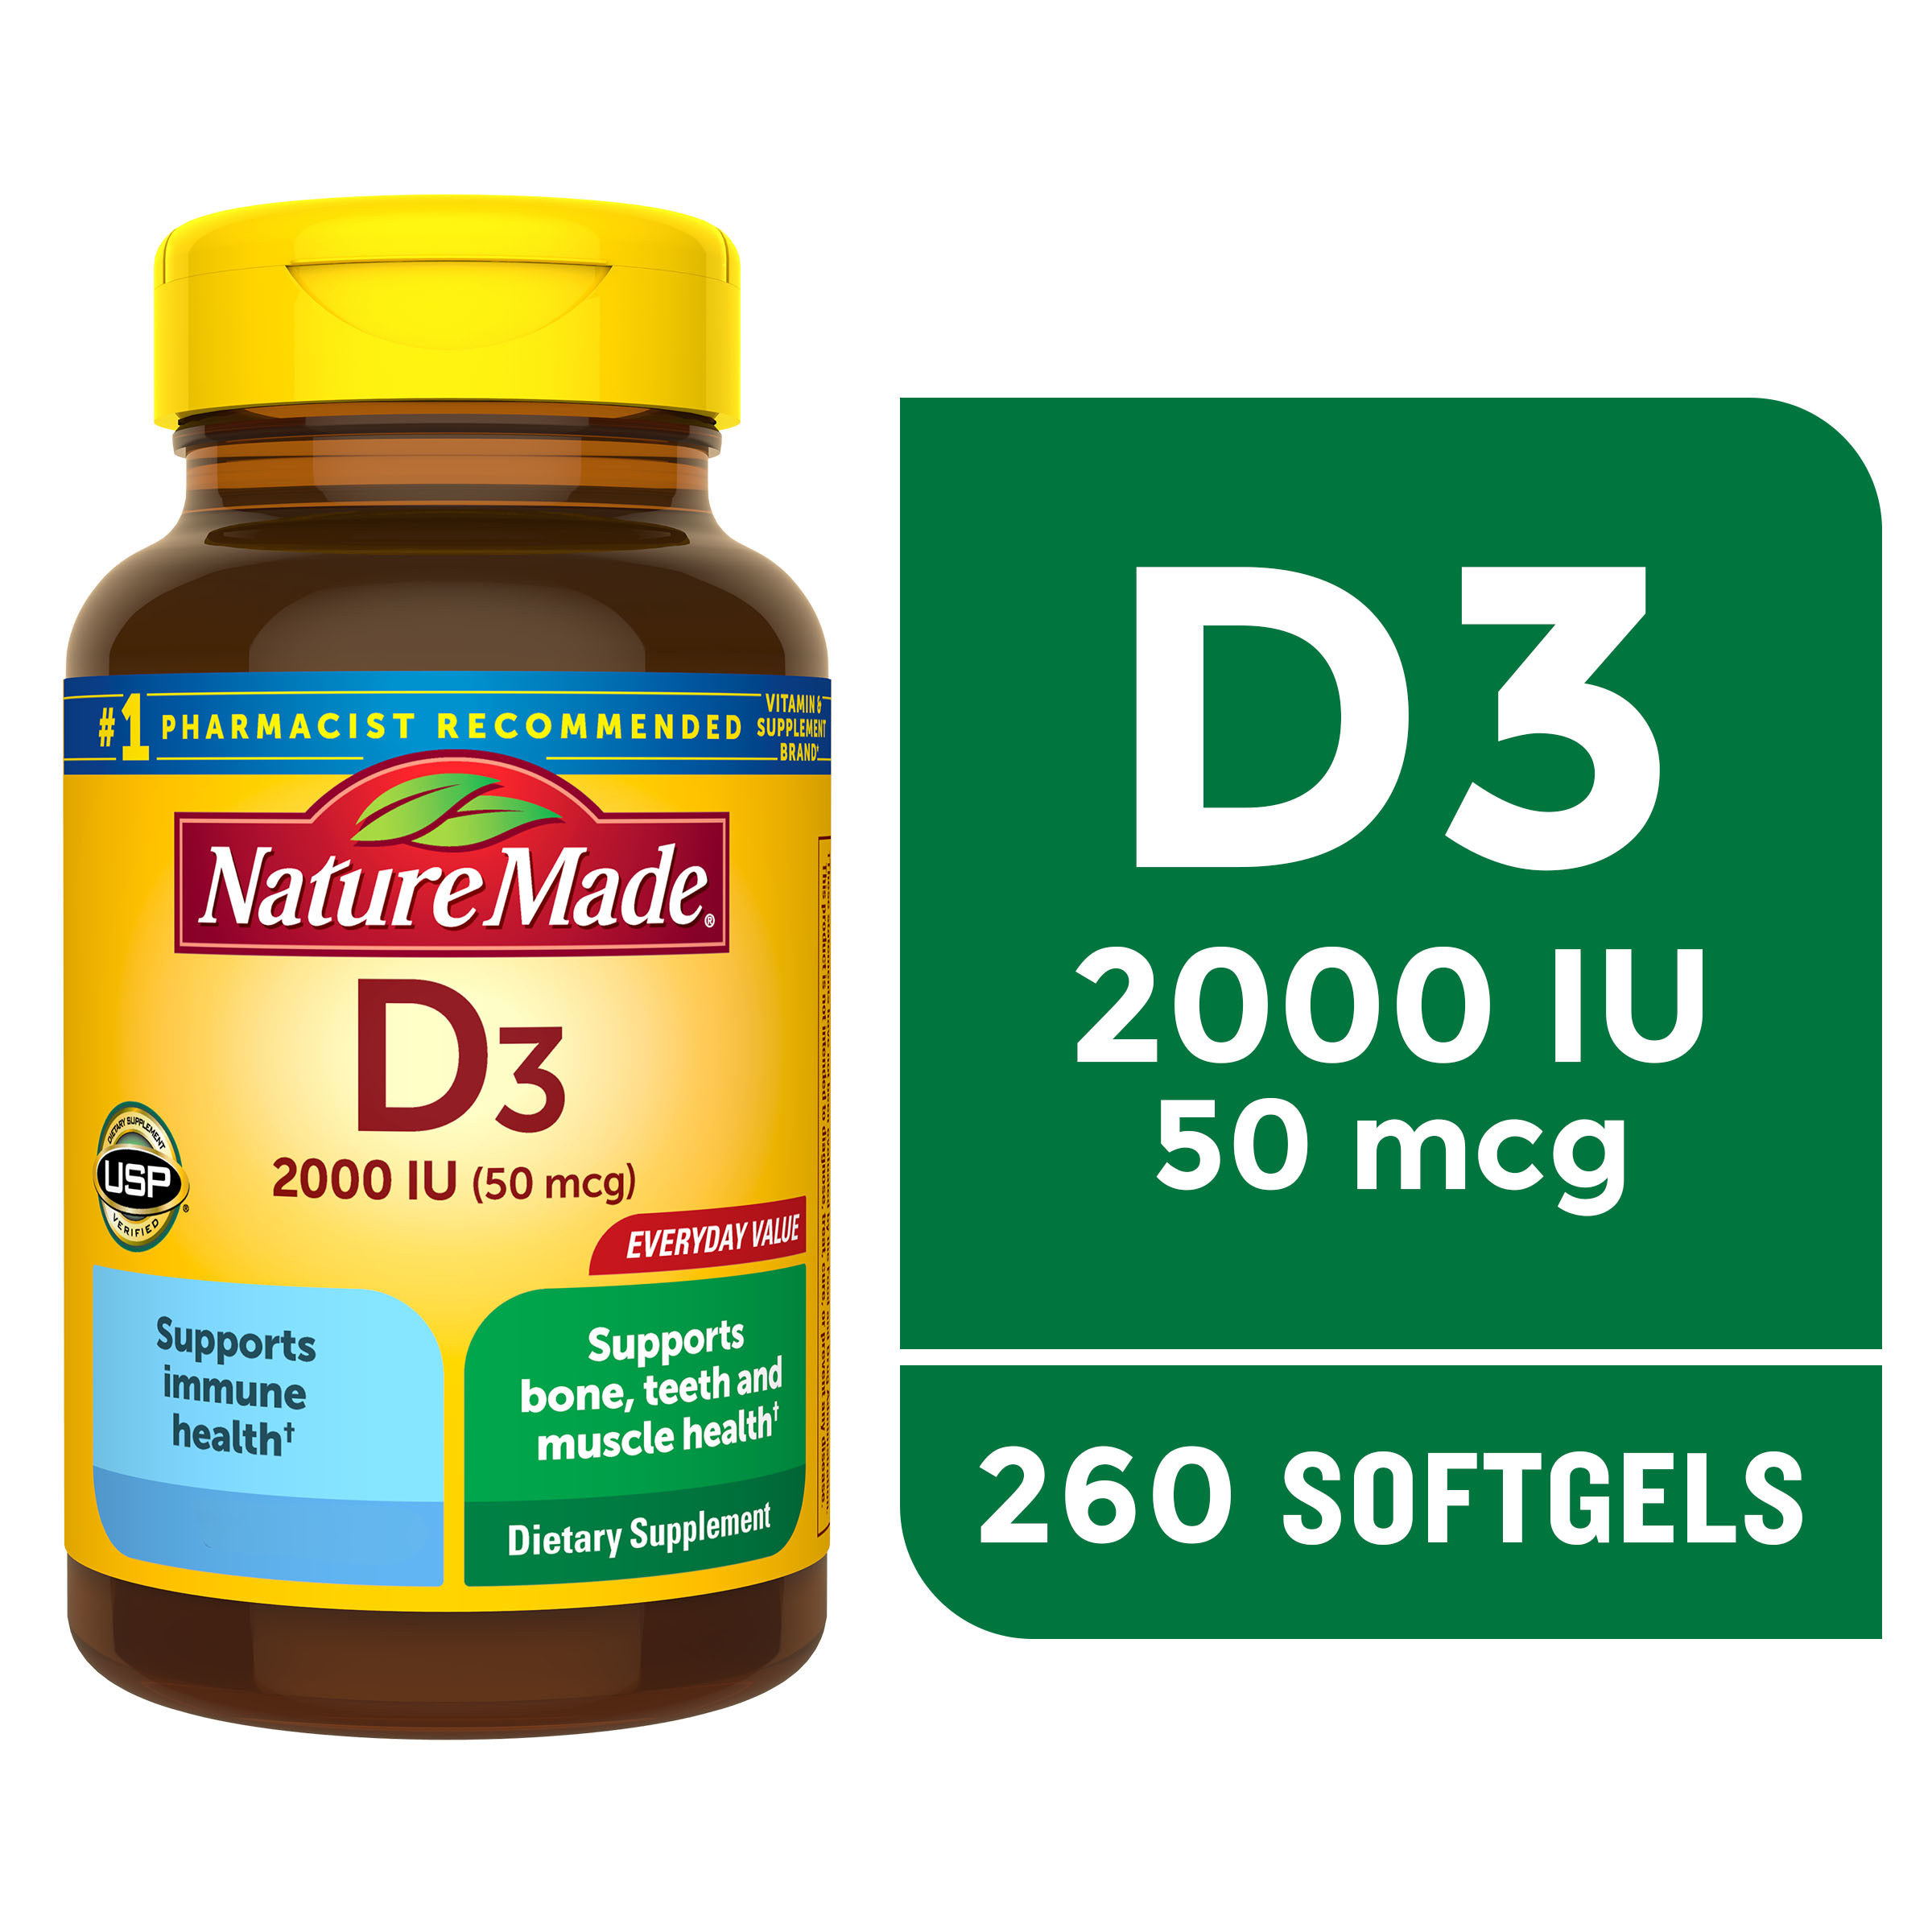 Nature Made Vitamin D3 2000 IU (50 mcg) Softgels, Dietary Supplement for Bone and Immune Health Support, 260 Count - image 1 of 15